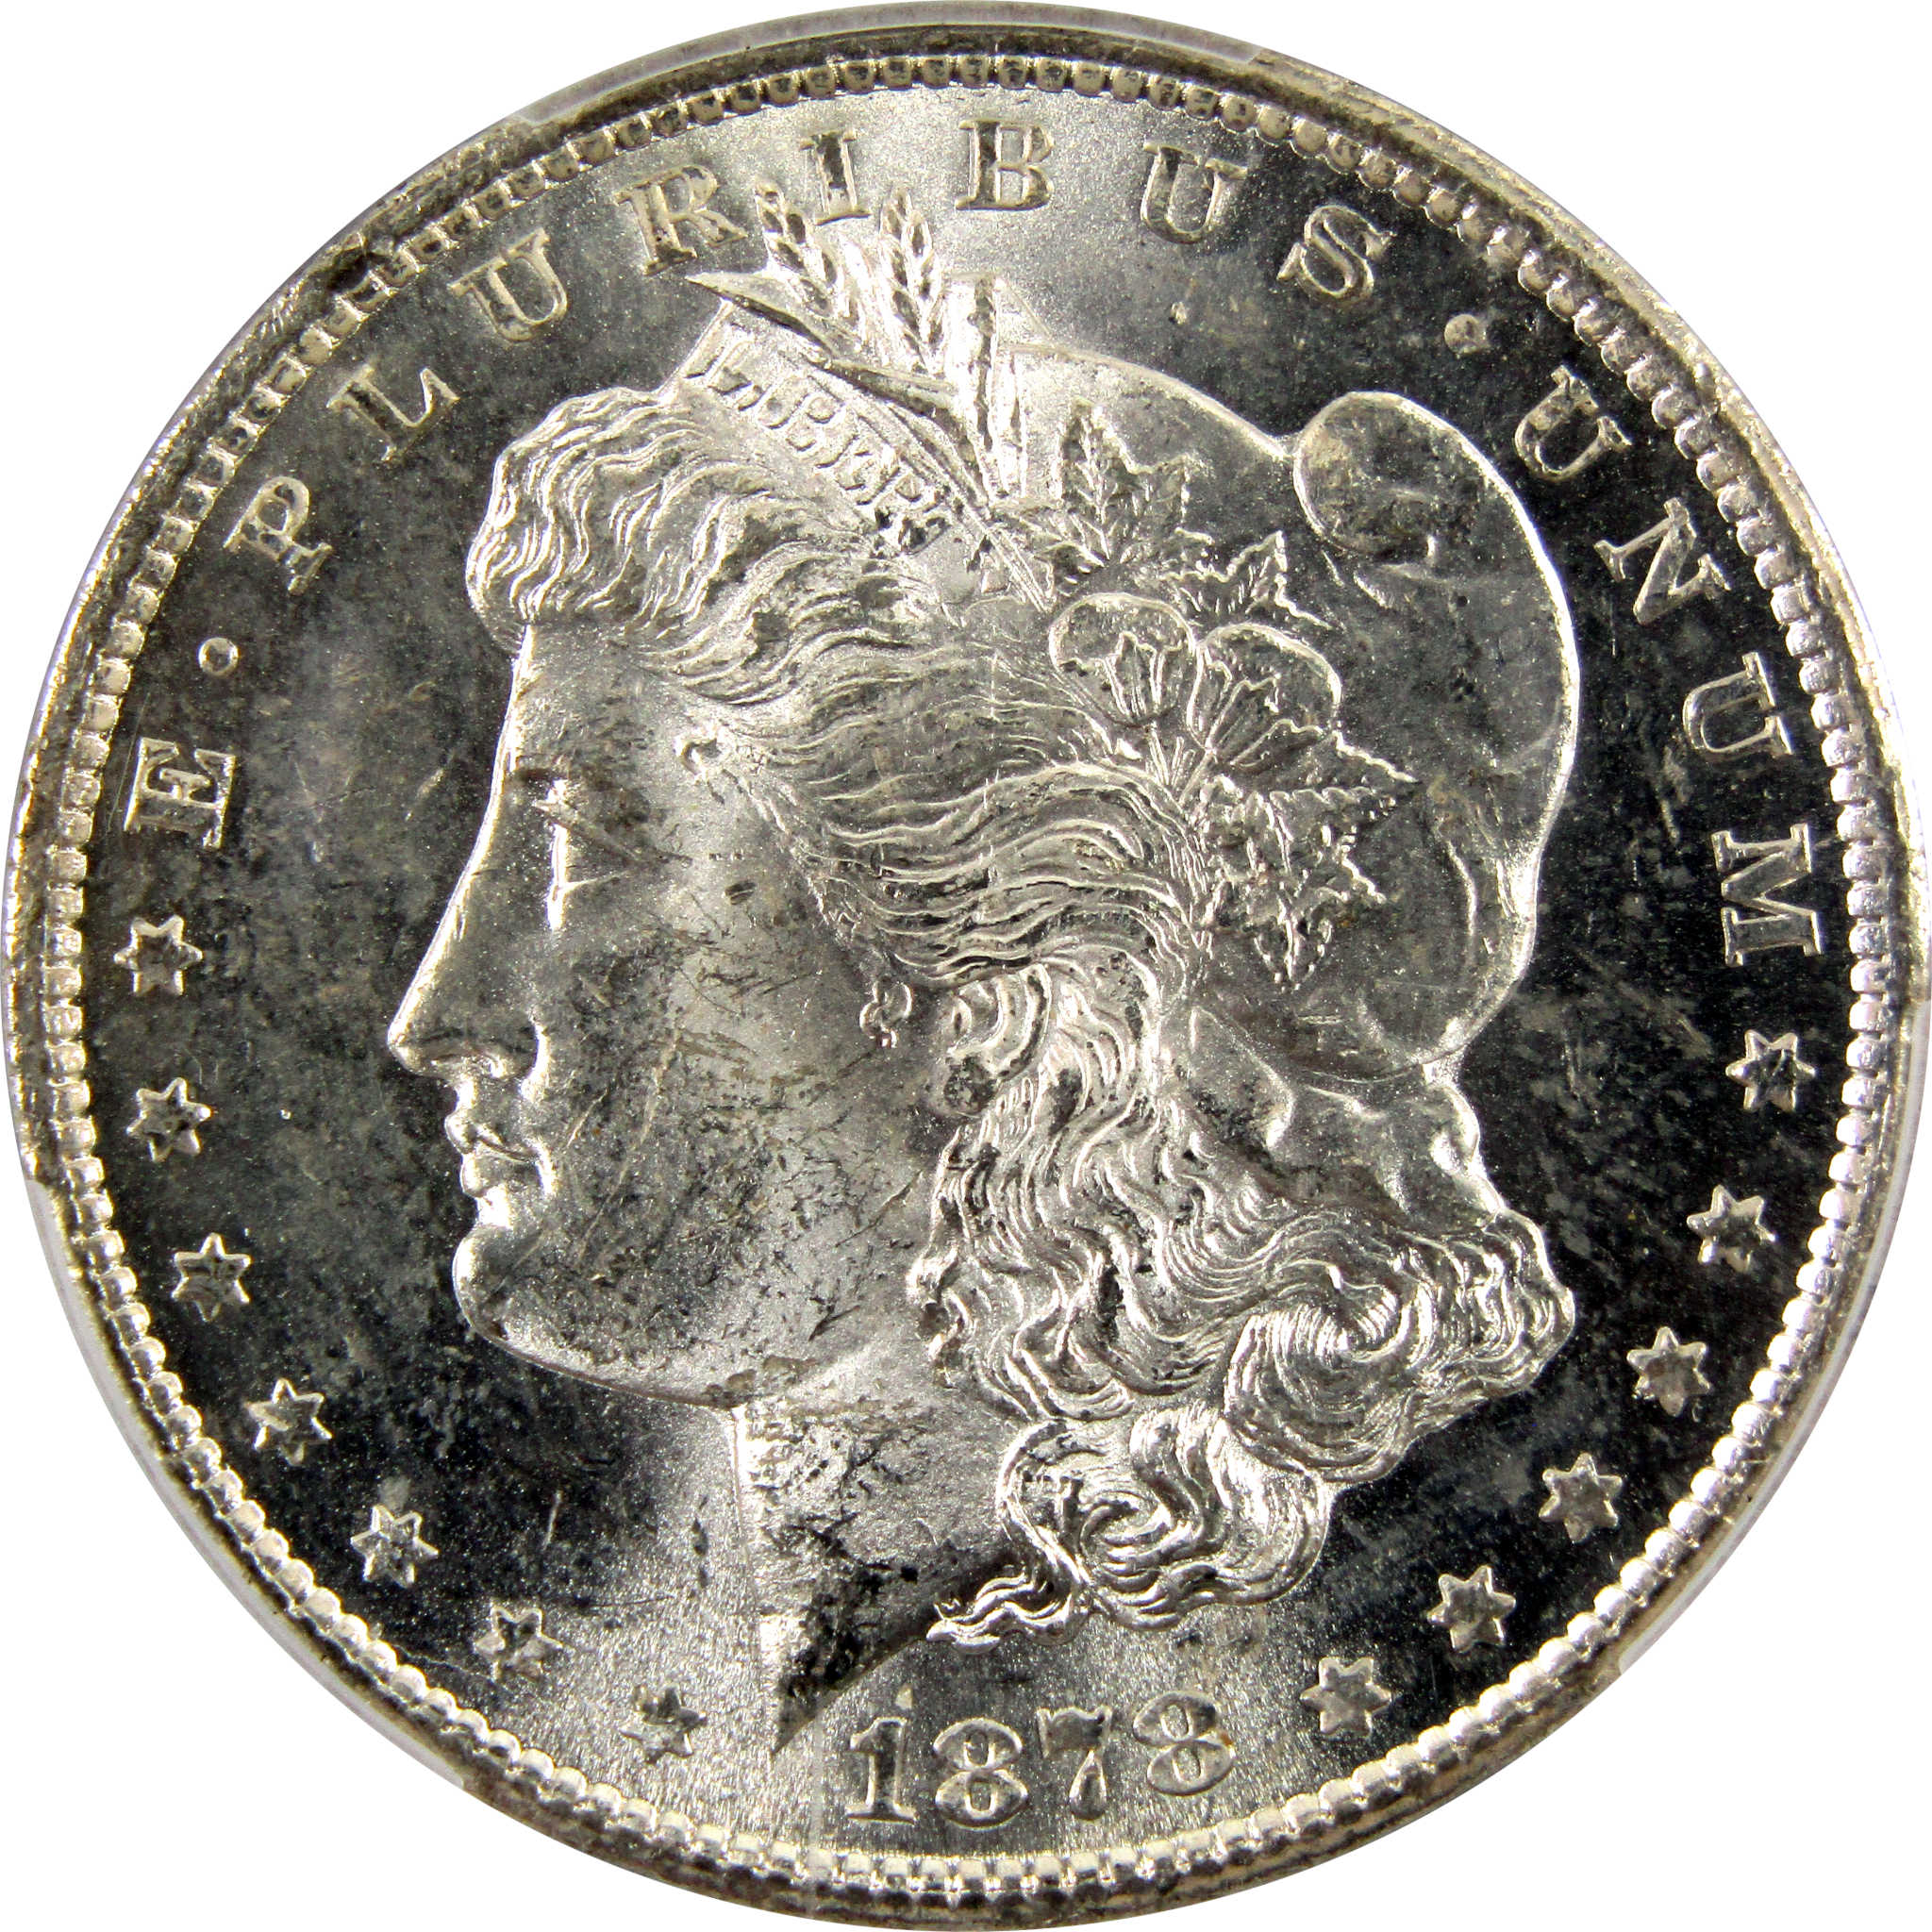 1878 CC Morgan Dollar MS 63 PCGS Silver $1 Uncirculated SKU:I11011 - Morgan coin - Morgan silver dollar - Morgan silver dollar for sale - Profile Coins &amp; Collectibles